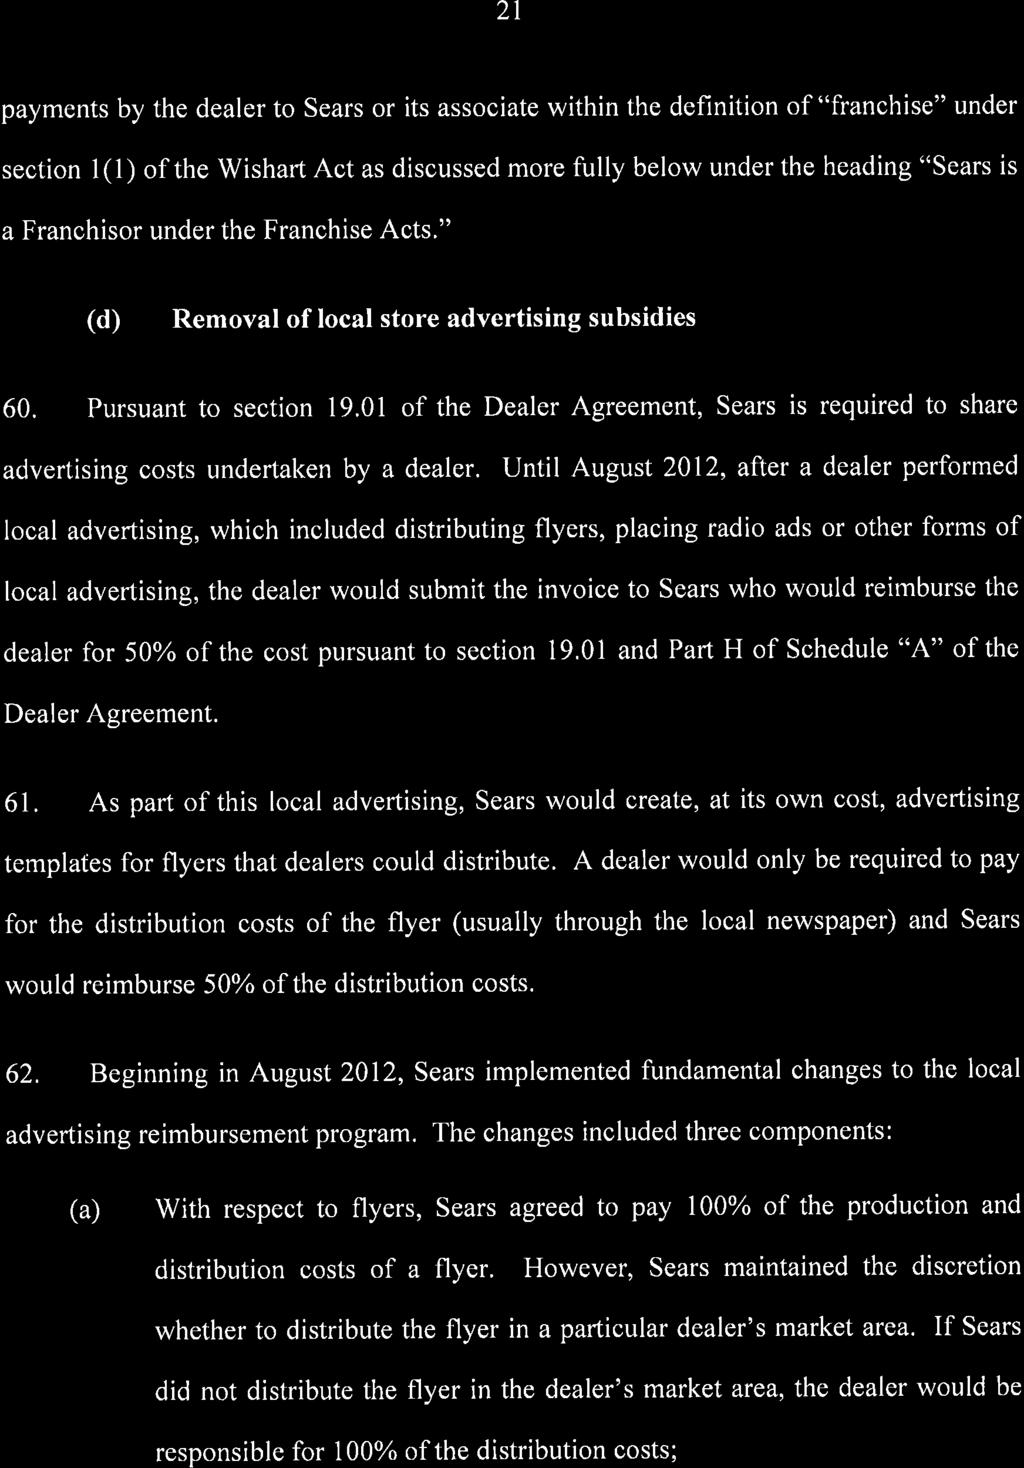 2t payments by the dealer to Sears or its associate within the definition of "franchise" under section l(l) of the Wishart Act as discussed more fully below under the heading "Sears is a Franchisor